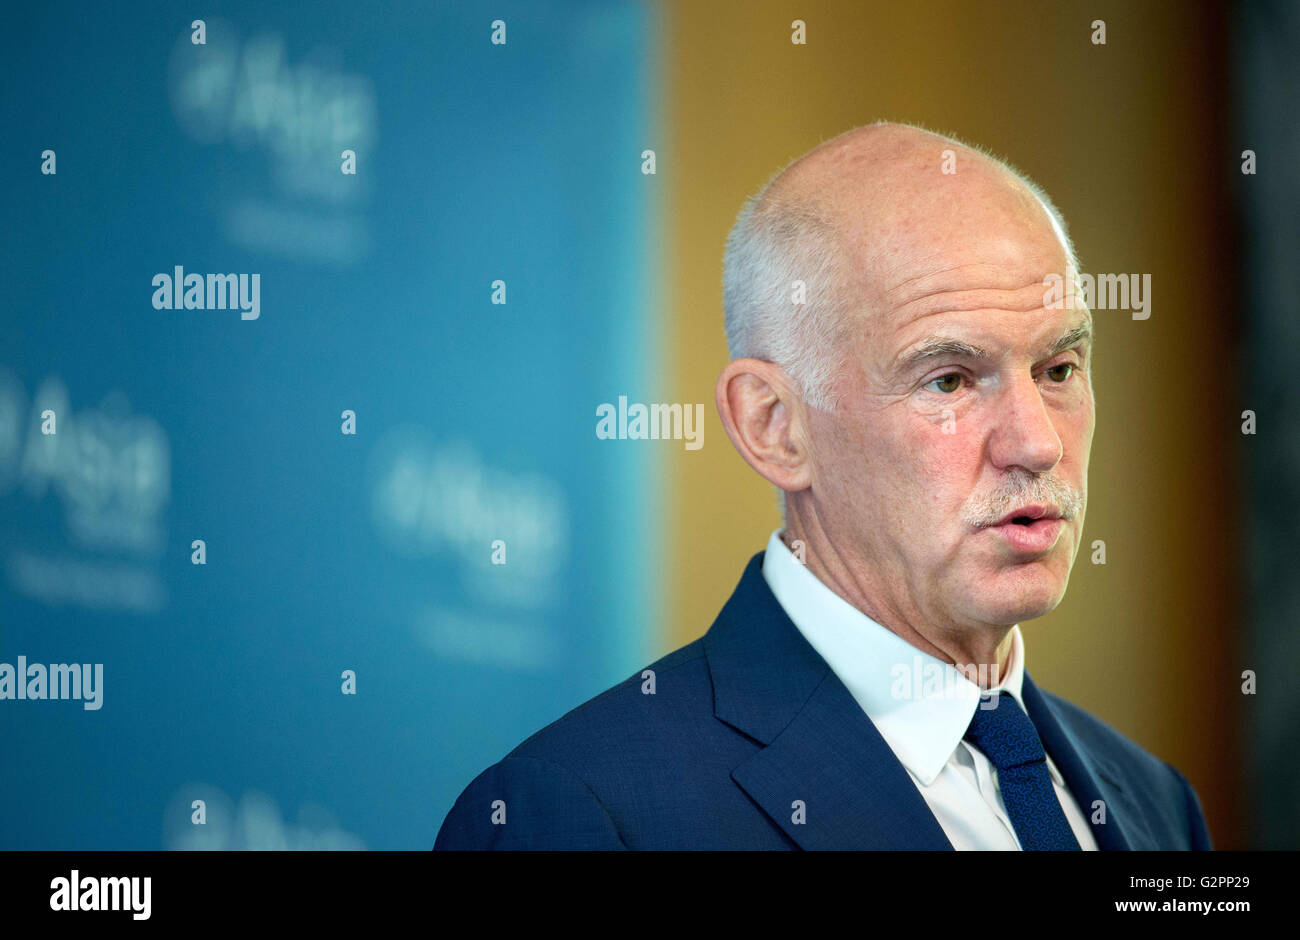 Hong Kong, China. 2nd June, 2016. George Papandreou gives a speech at the Asia Society of Hong Kong on Brexit. Papandreou served as the Prime Minister of Greece between 2009 and 2011, at the height of the Greek government debt crisis. He represented the Panhellenic Socialist Movement or PASOK. The European financial crisis and the refugee crisis that followed have played into the hands of Euro skeptics. Britain faces a national referendum on June 23 on whether to leave or remain in the European Union, which splits Britons and Europeans alike. © ZUMA Press, Inc./Alamy Live News Stock Photo